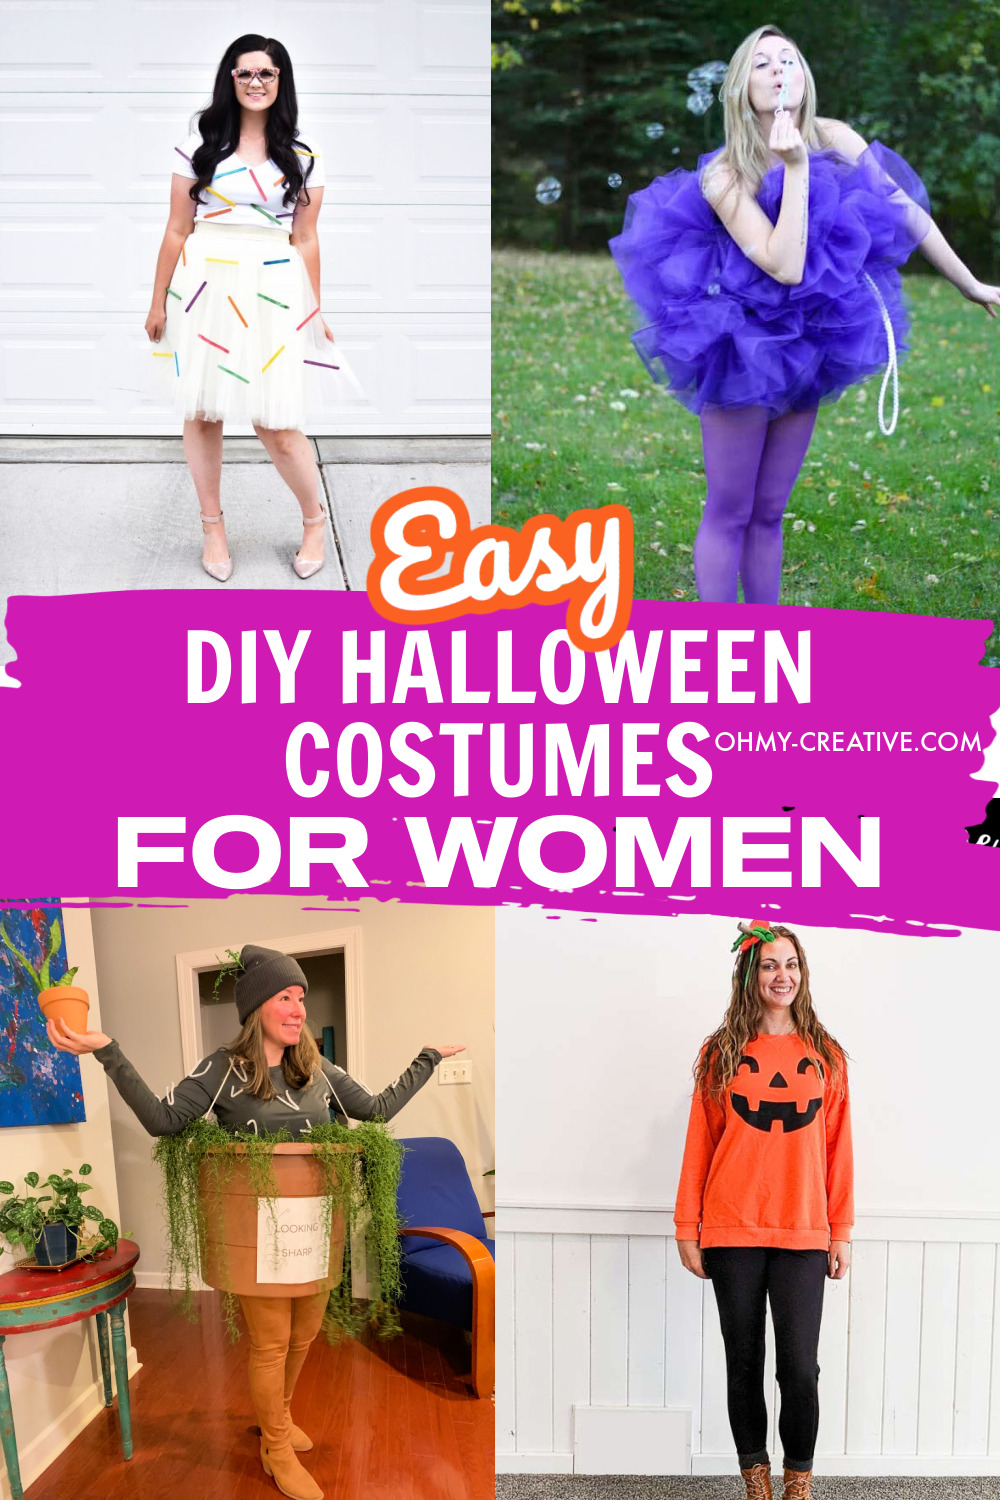 These DIY costumes for women include a sprinkle costume, a bath poof costume, a DIY plant costume and a simple women's pumpkin costume. Have fun creating something that is perfect for you!